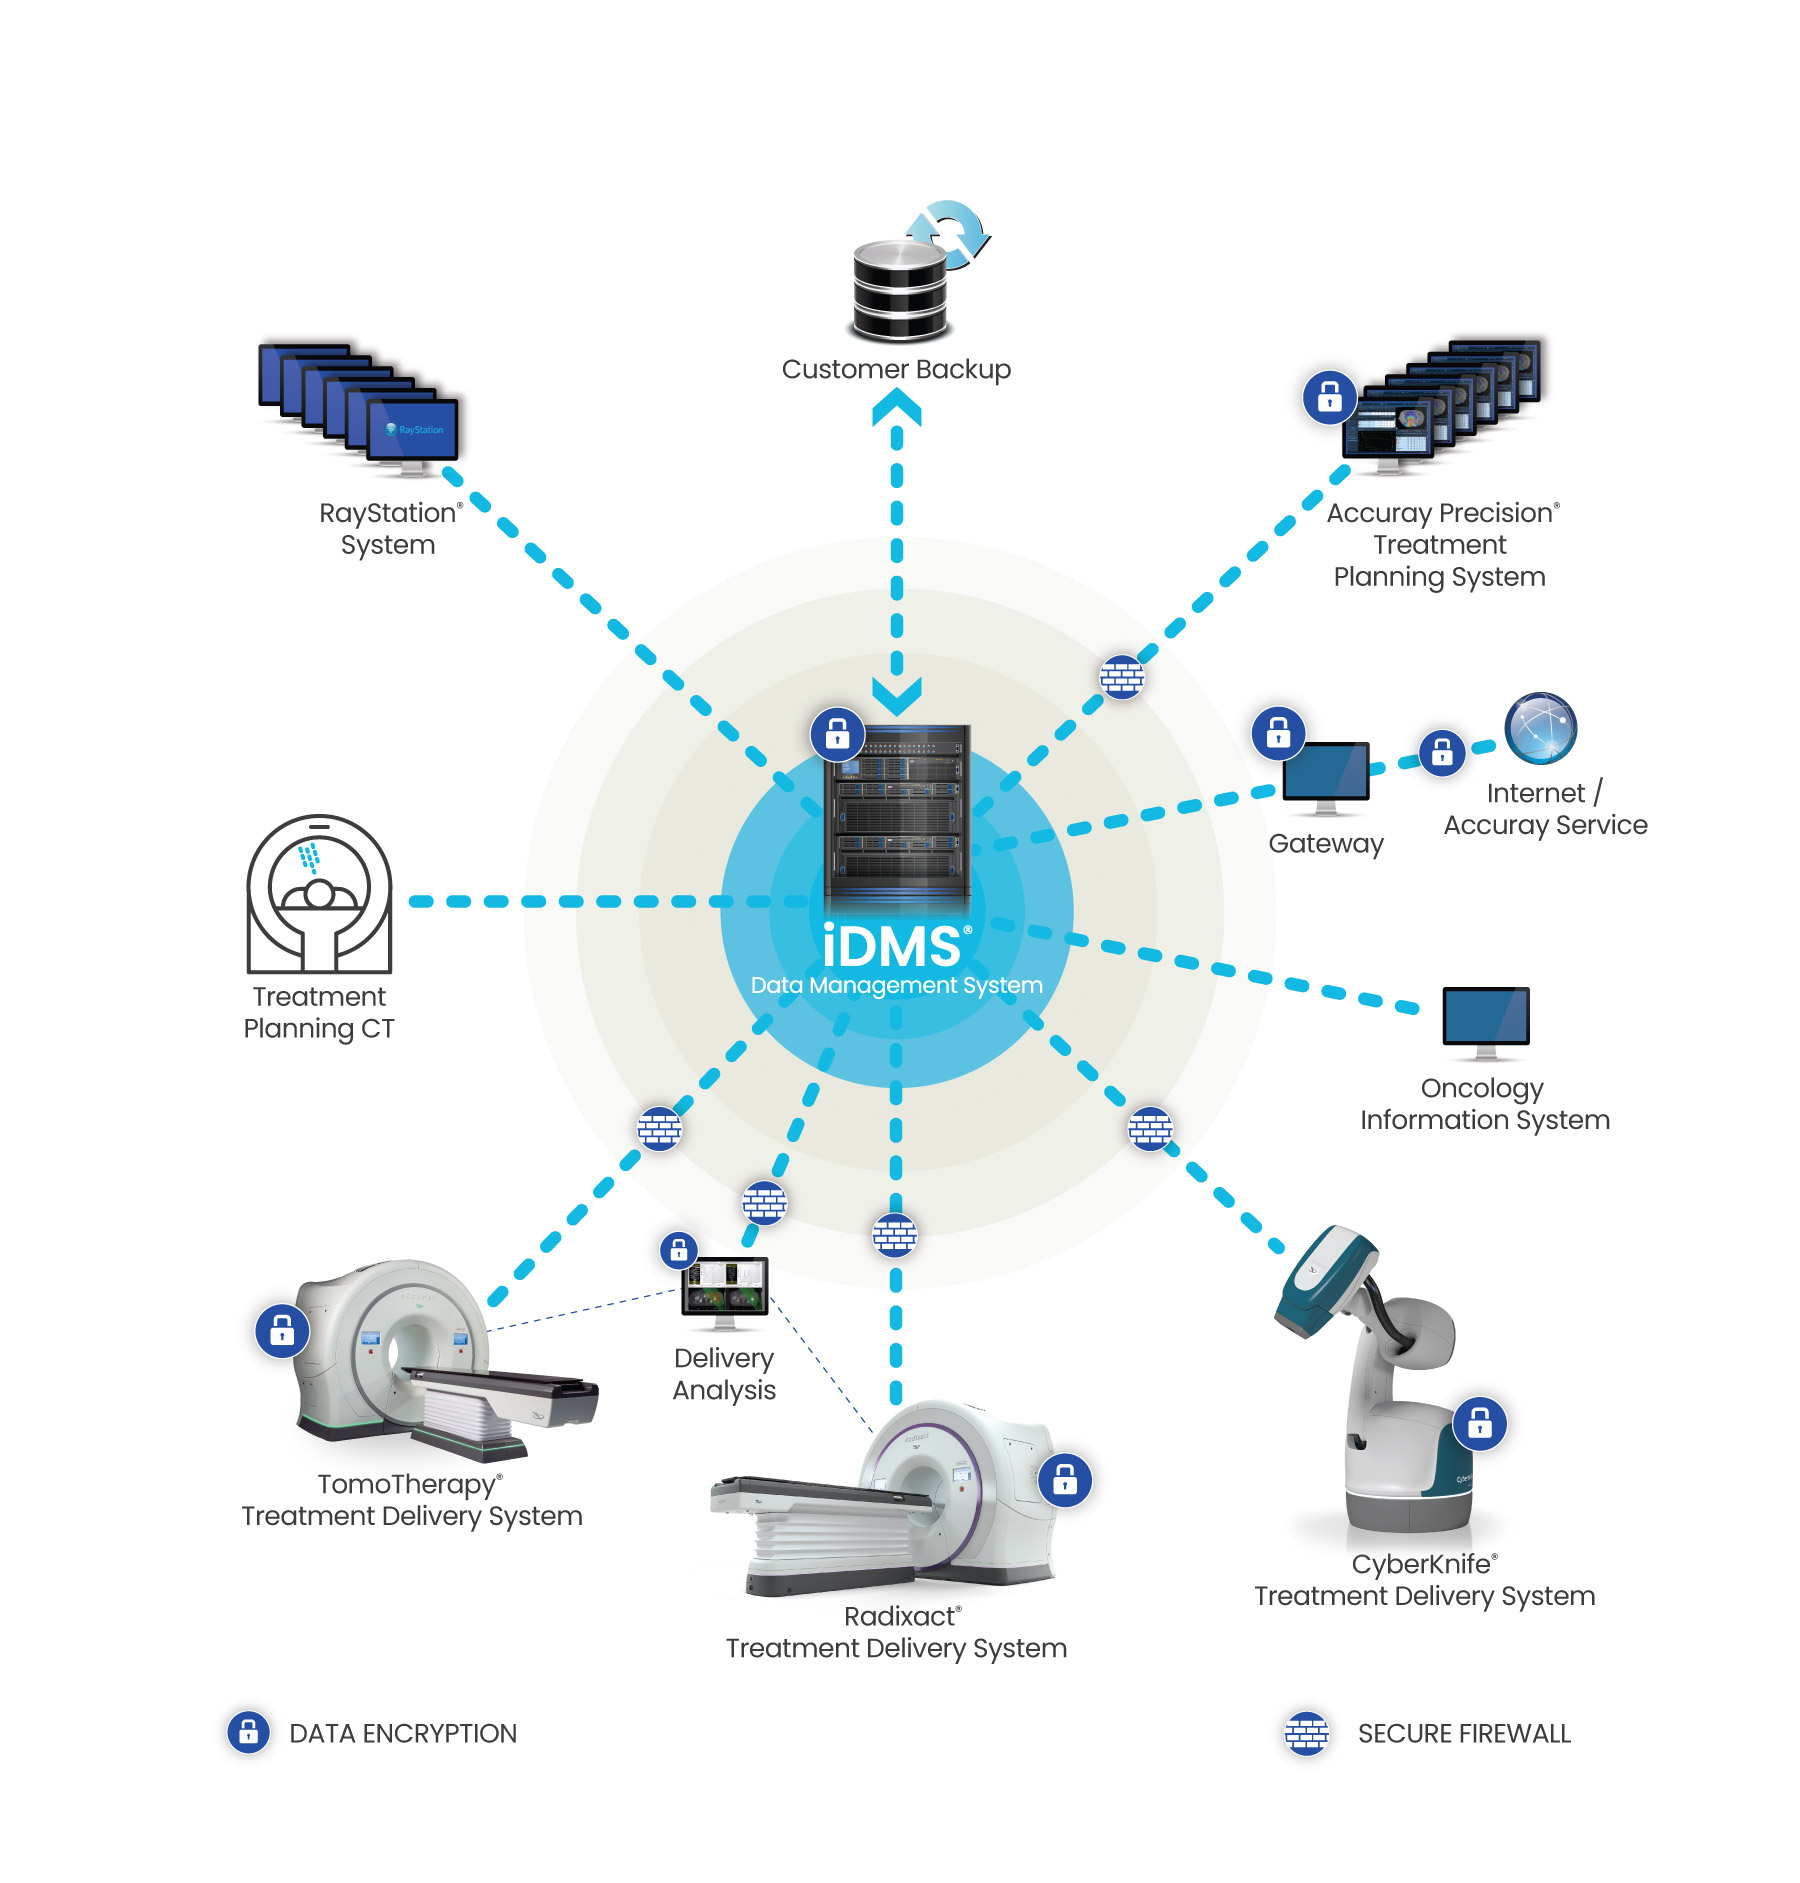 IDMS data management system for Accuray's TomoTherapy, Radixact and CyberKnife systems